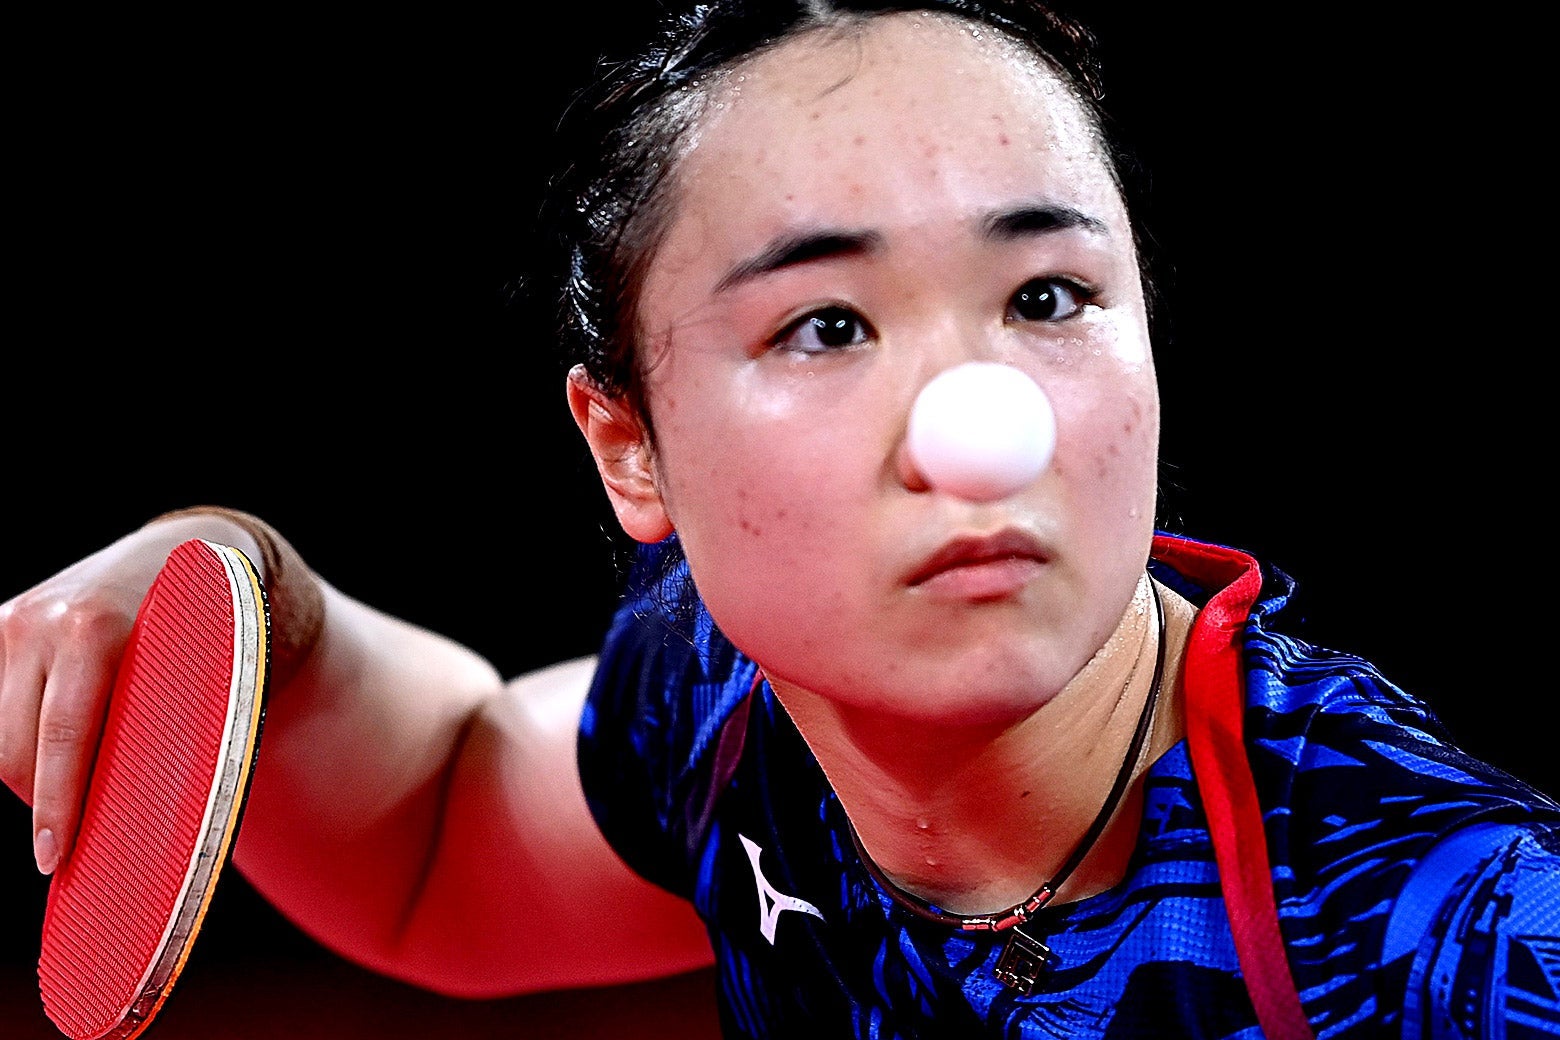 A table tennis player stares intently as she holds her paddle. The white ping pong ball is centered on her face like a clown nose.